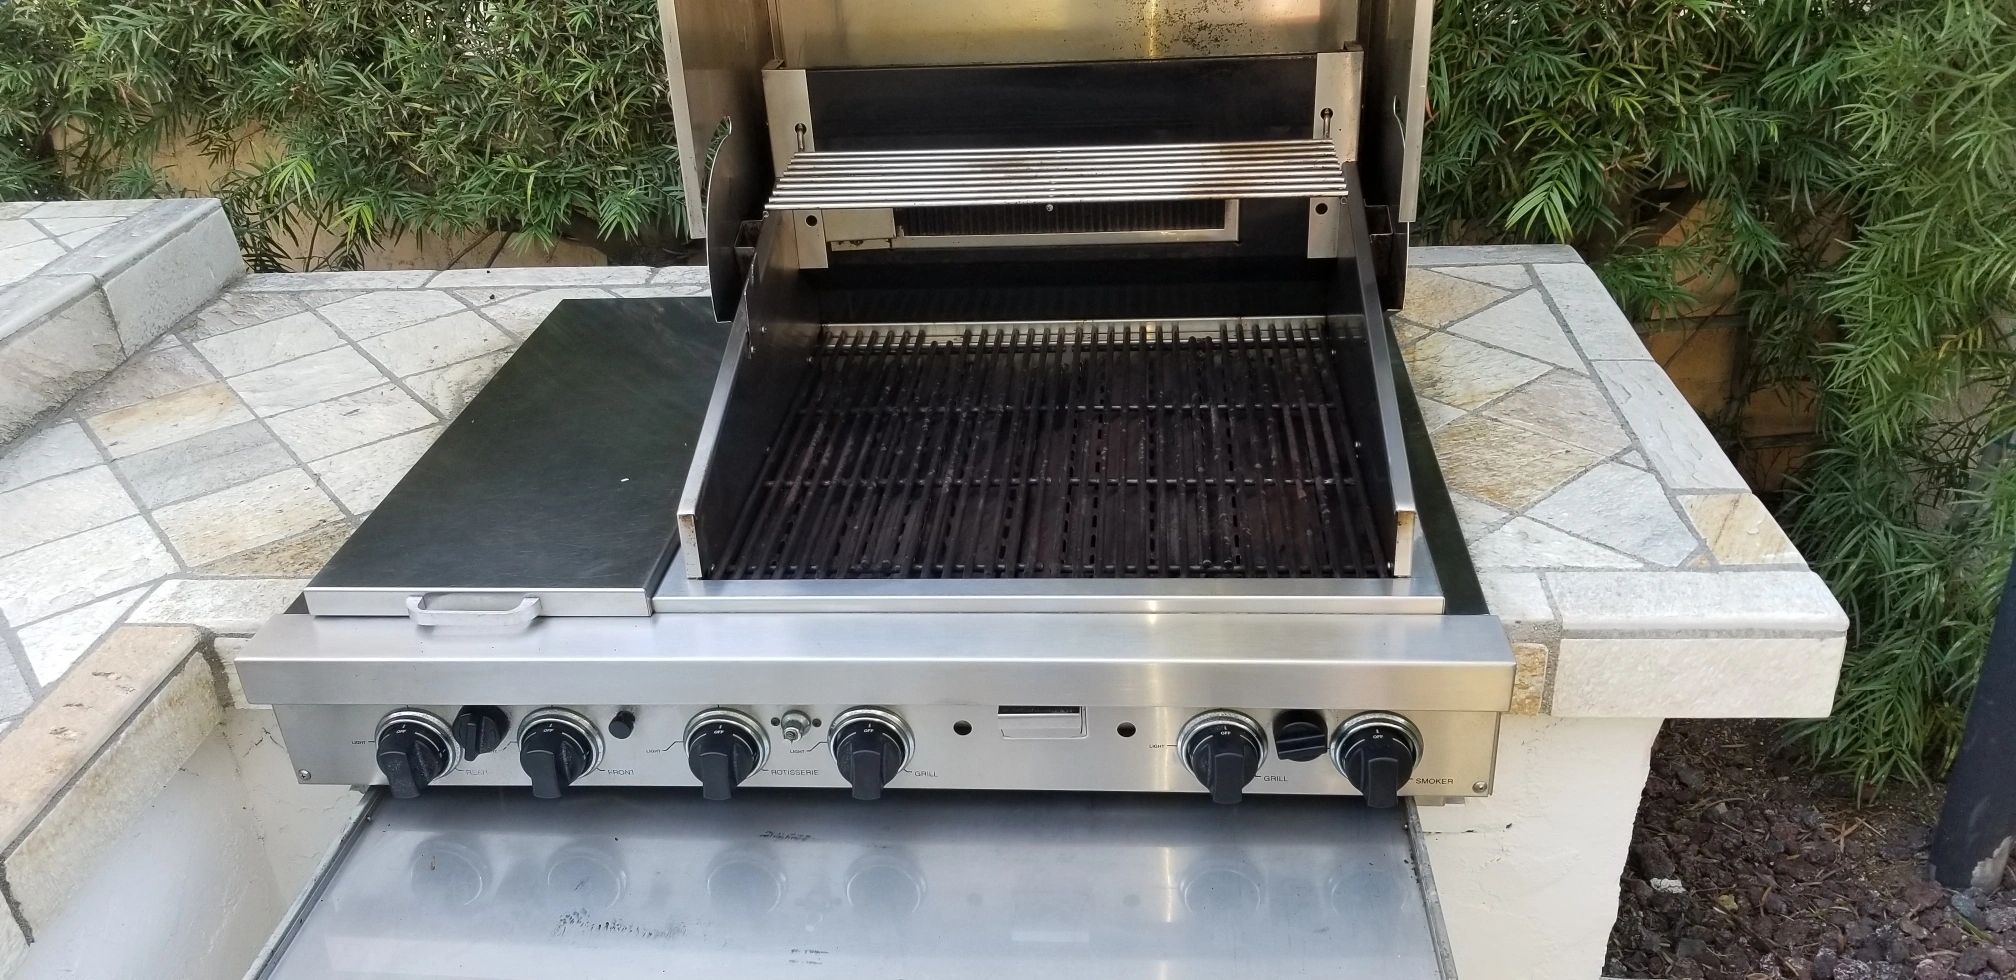 BBQ All Repair Service And Cleaning - GrillTor